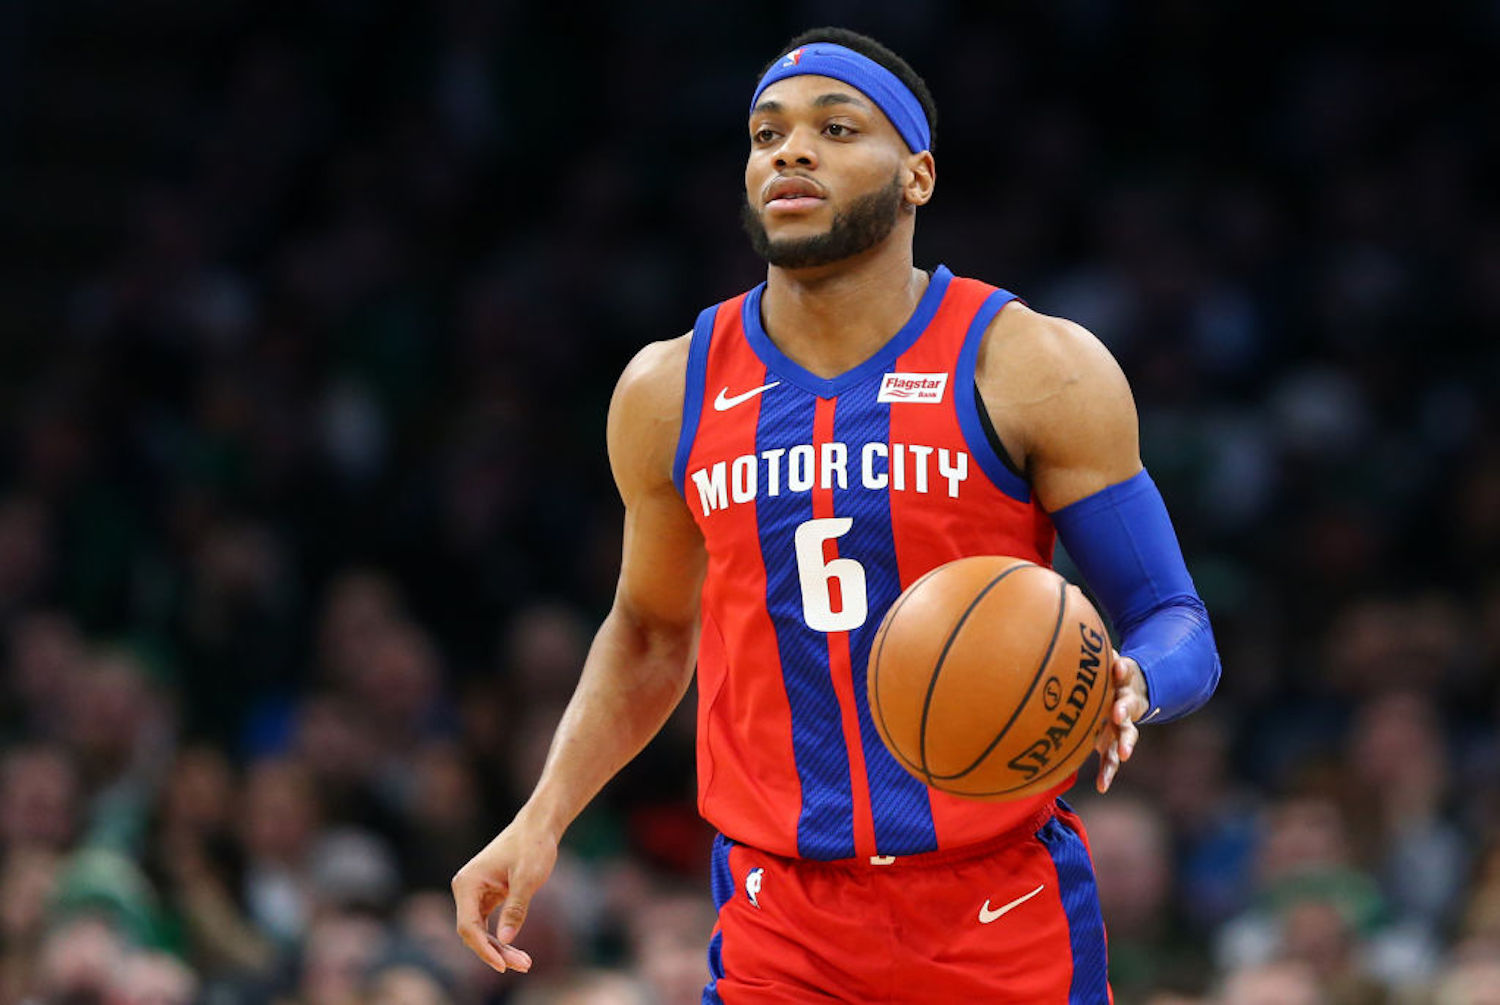 The Brooklyn Nets made their first move of the 2020-21 NBA season by trading for defensive-minded guard Bruce Brown.